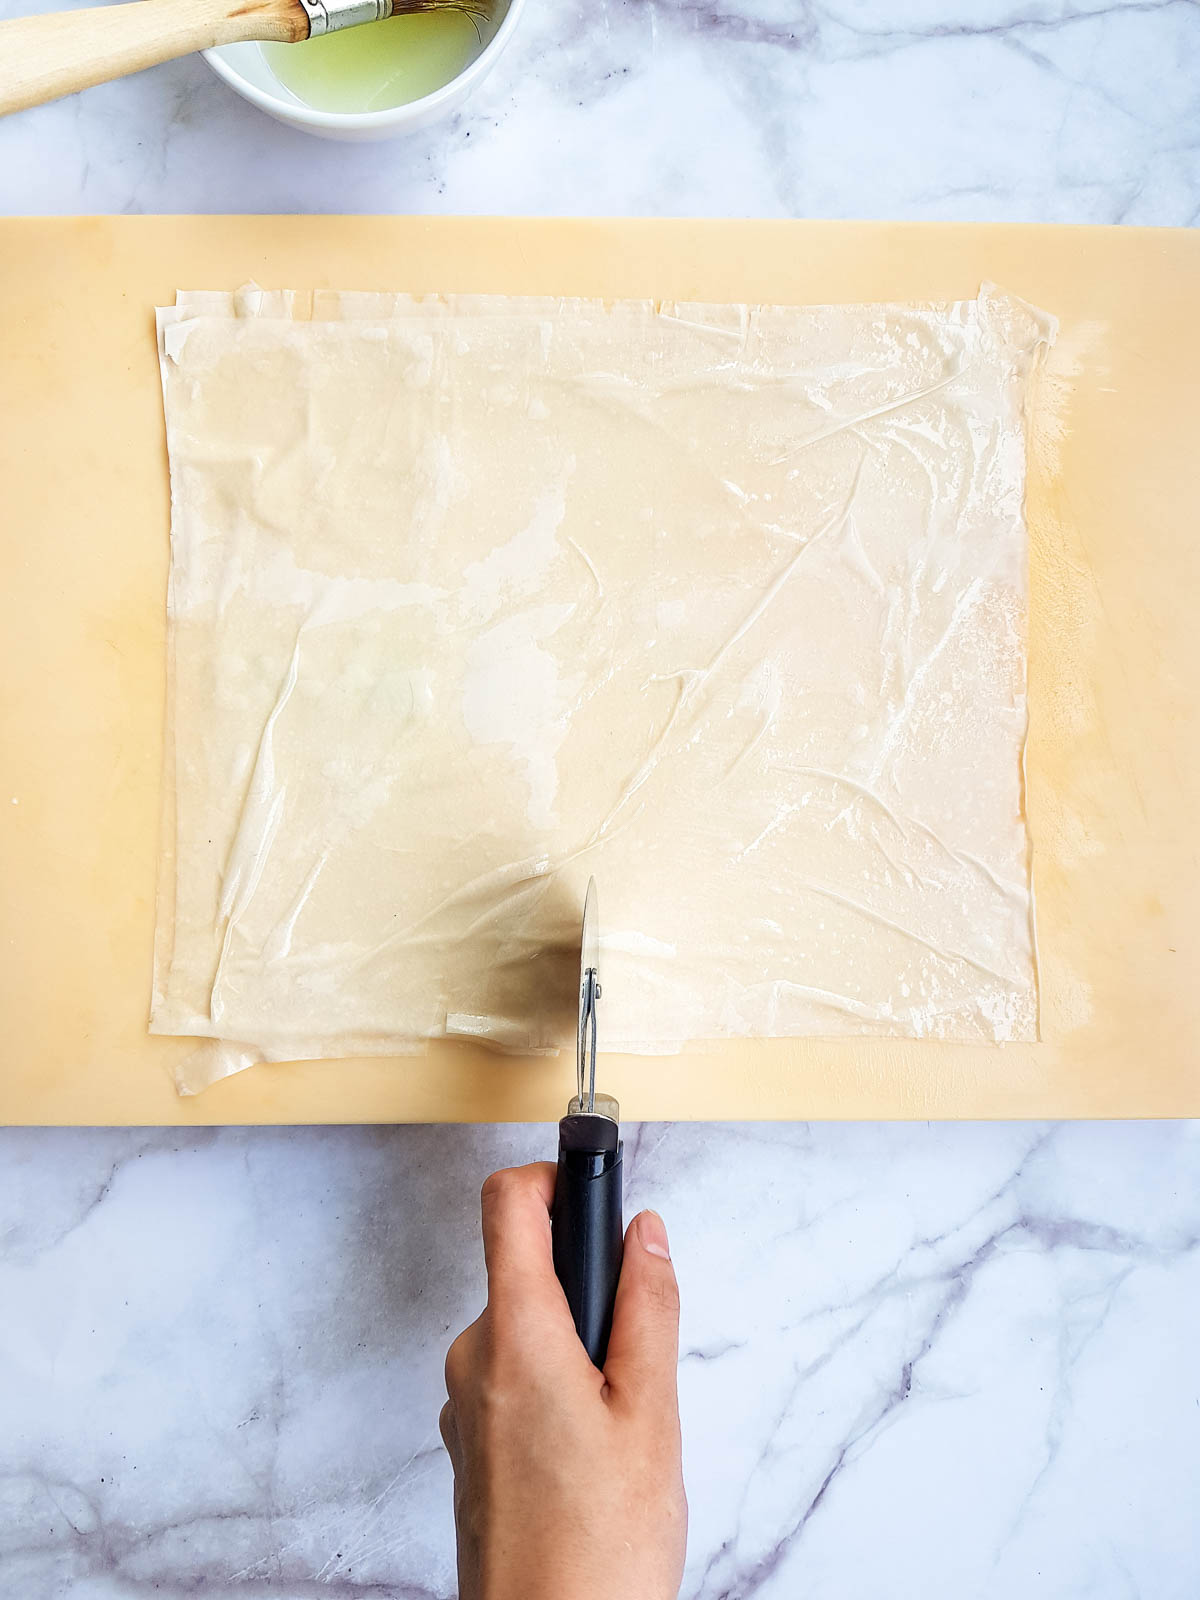 Slicing phyllo dough sheets brushed with oil.